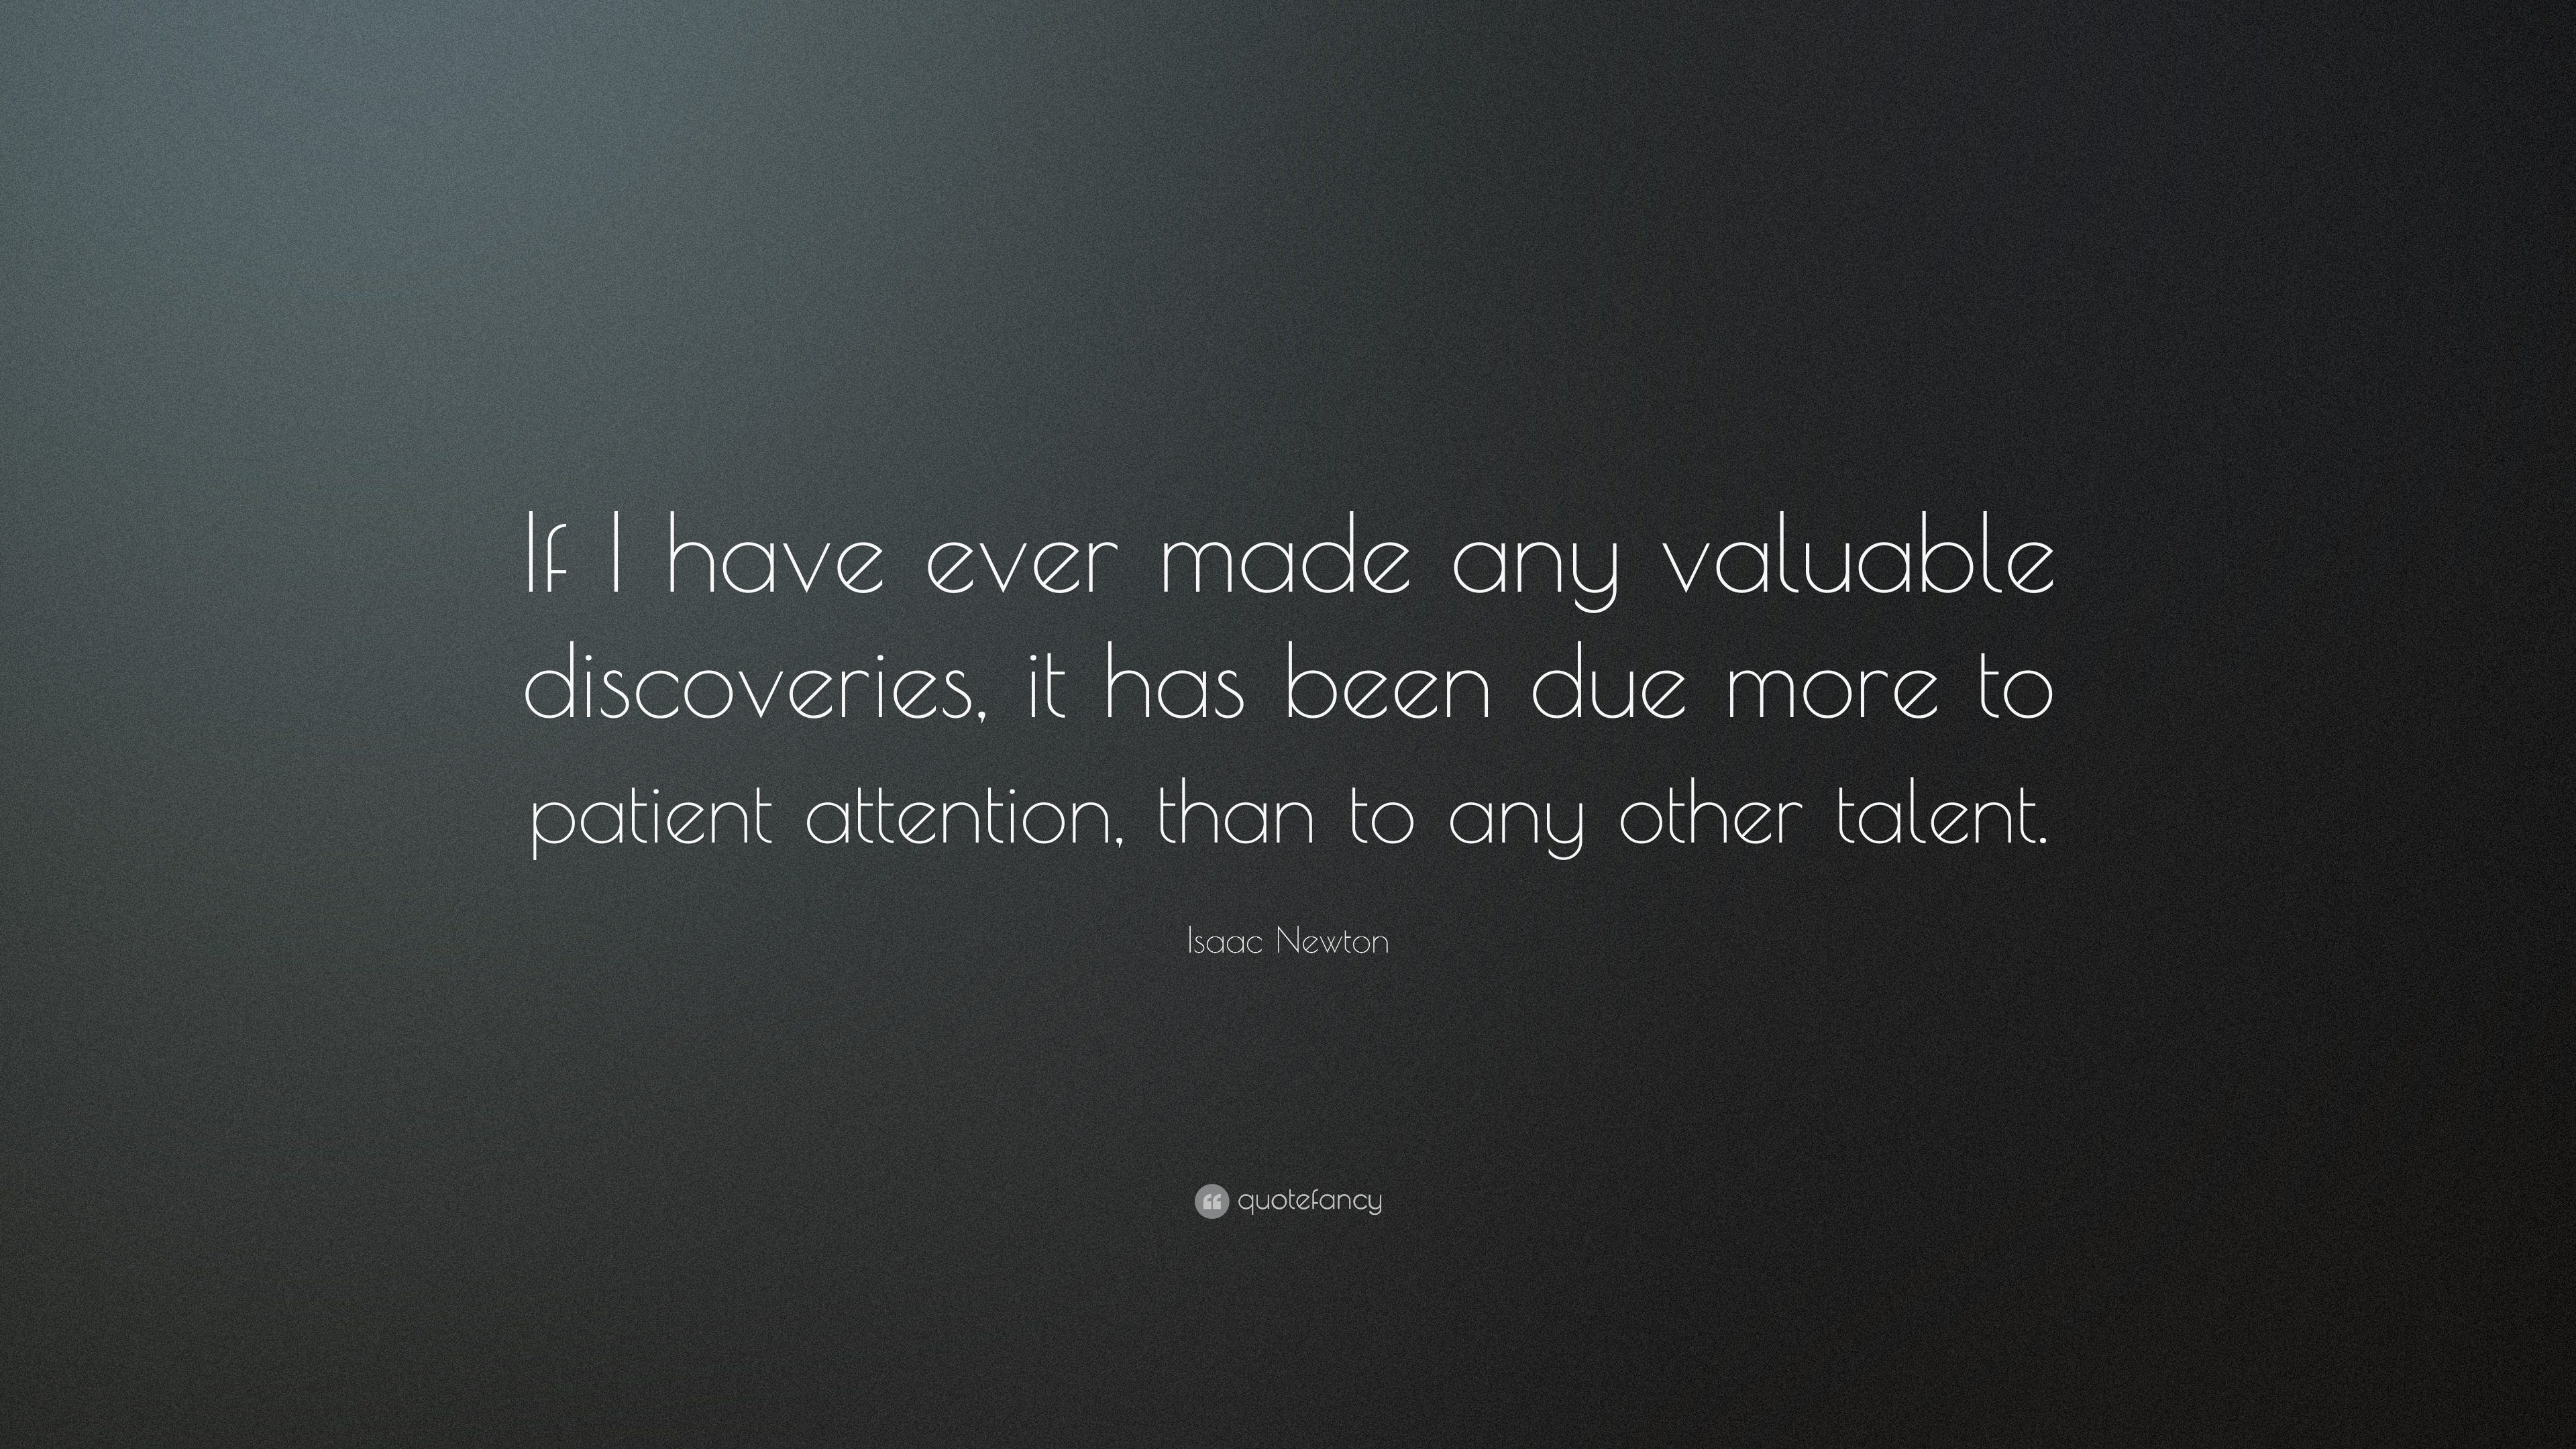 3840x2160 Isaac Newton Quote: “If I have ever made any valuable discoveries, it has